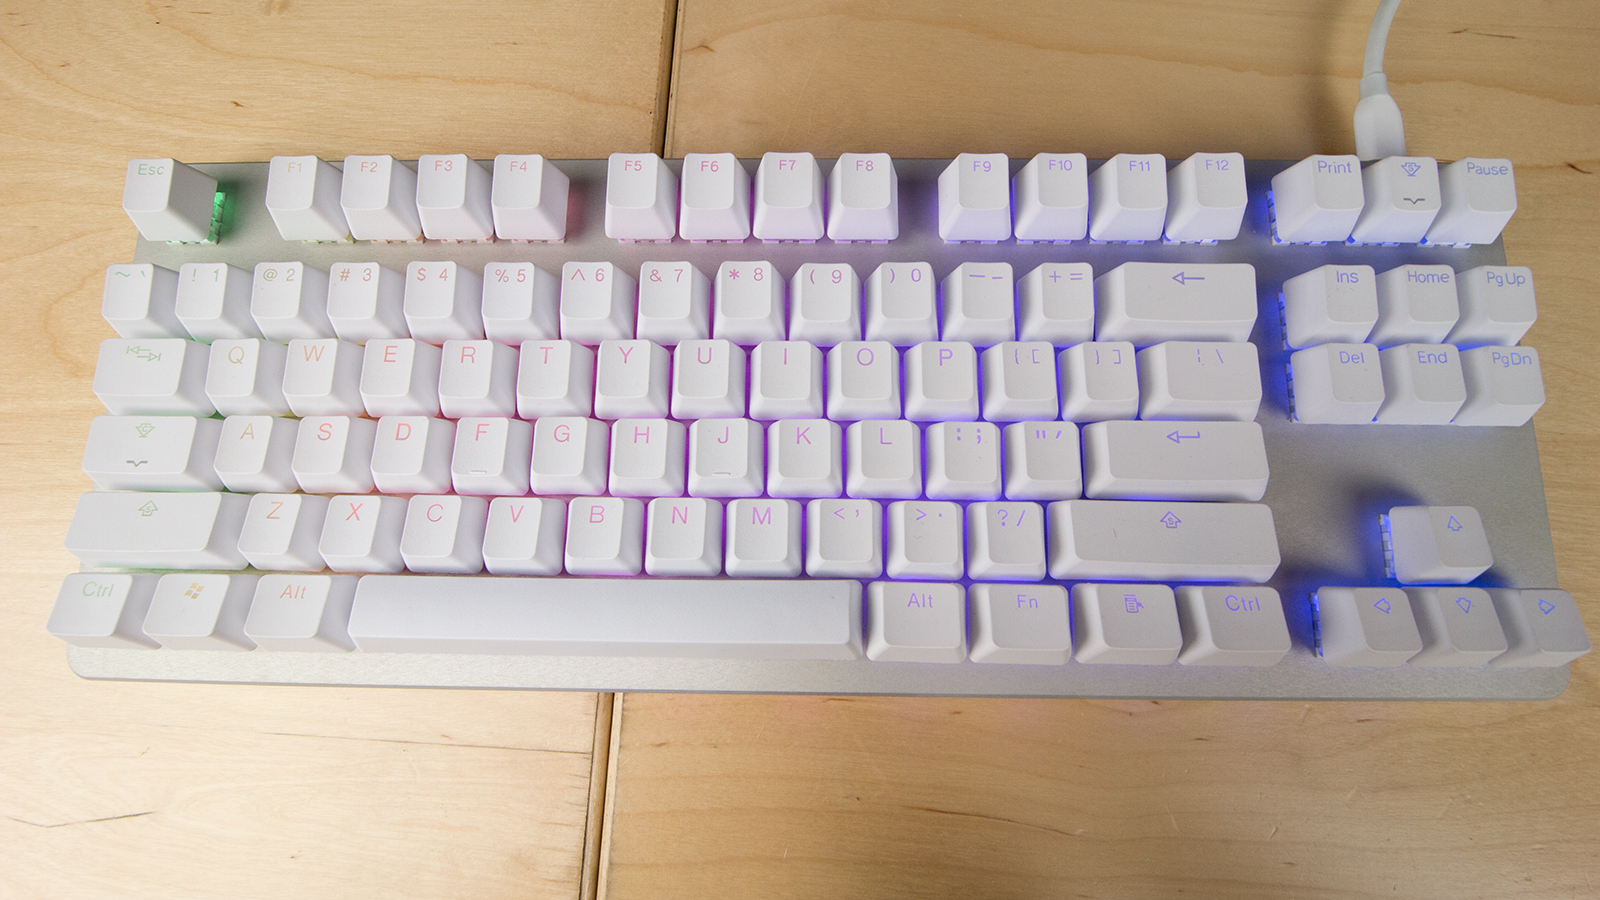 The Open Source K-Type Keyboard Makes A Fantastic First Impression